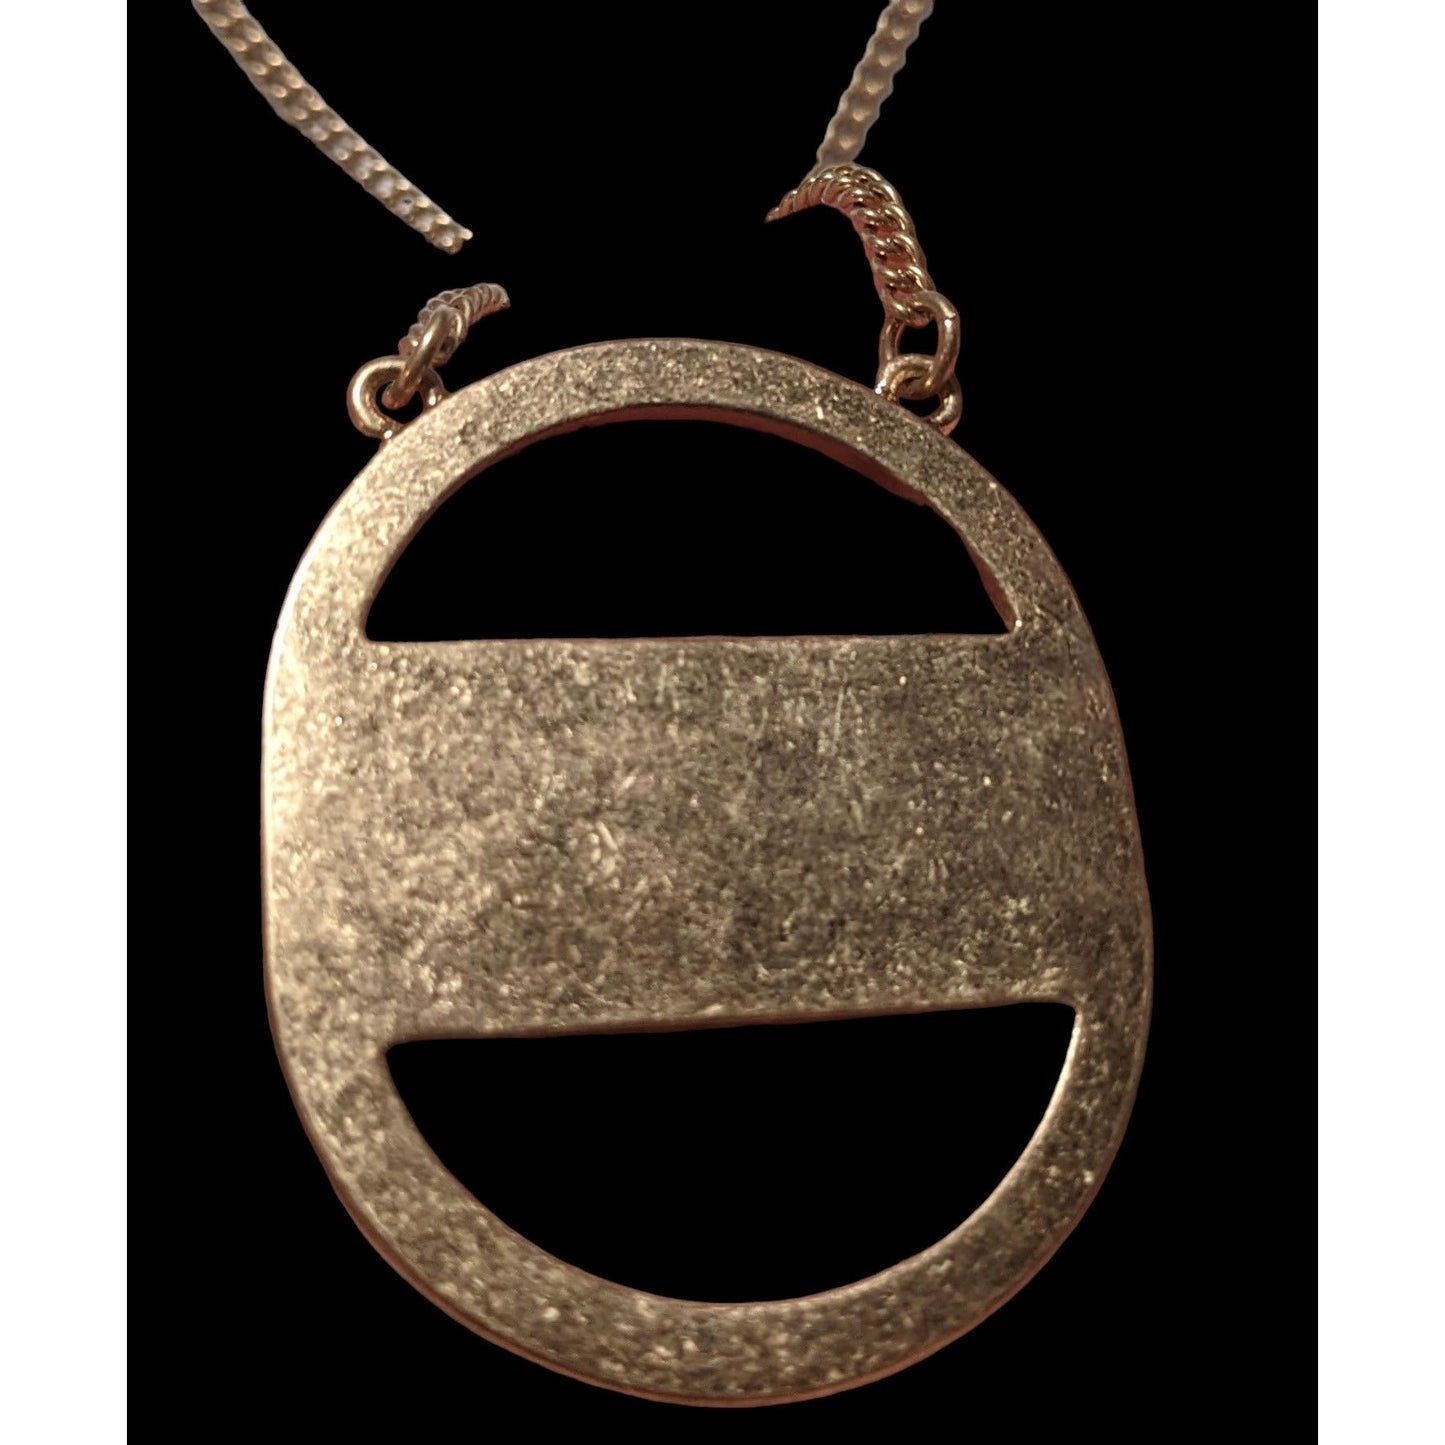 Charming Charlie Gold Leather Pendant Necklace